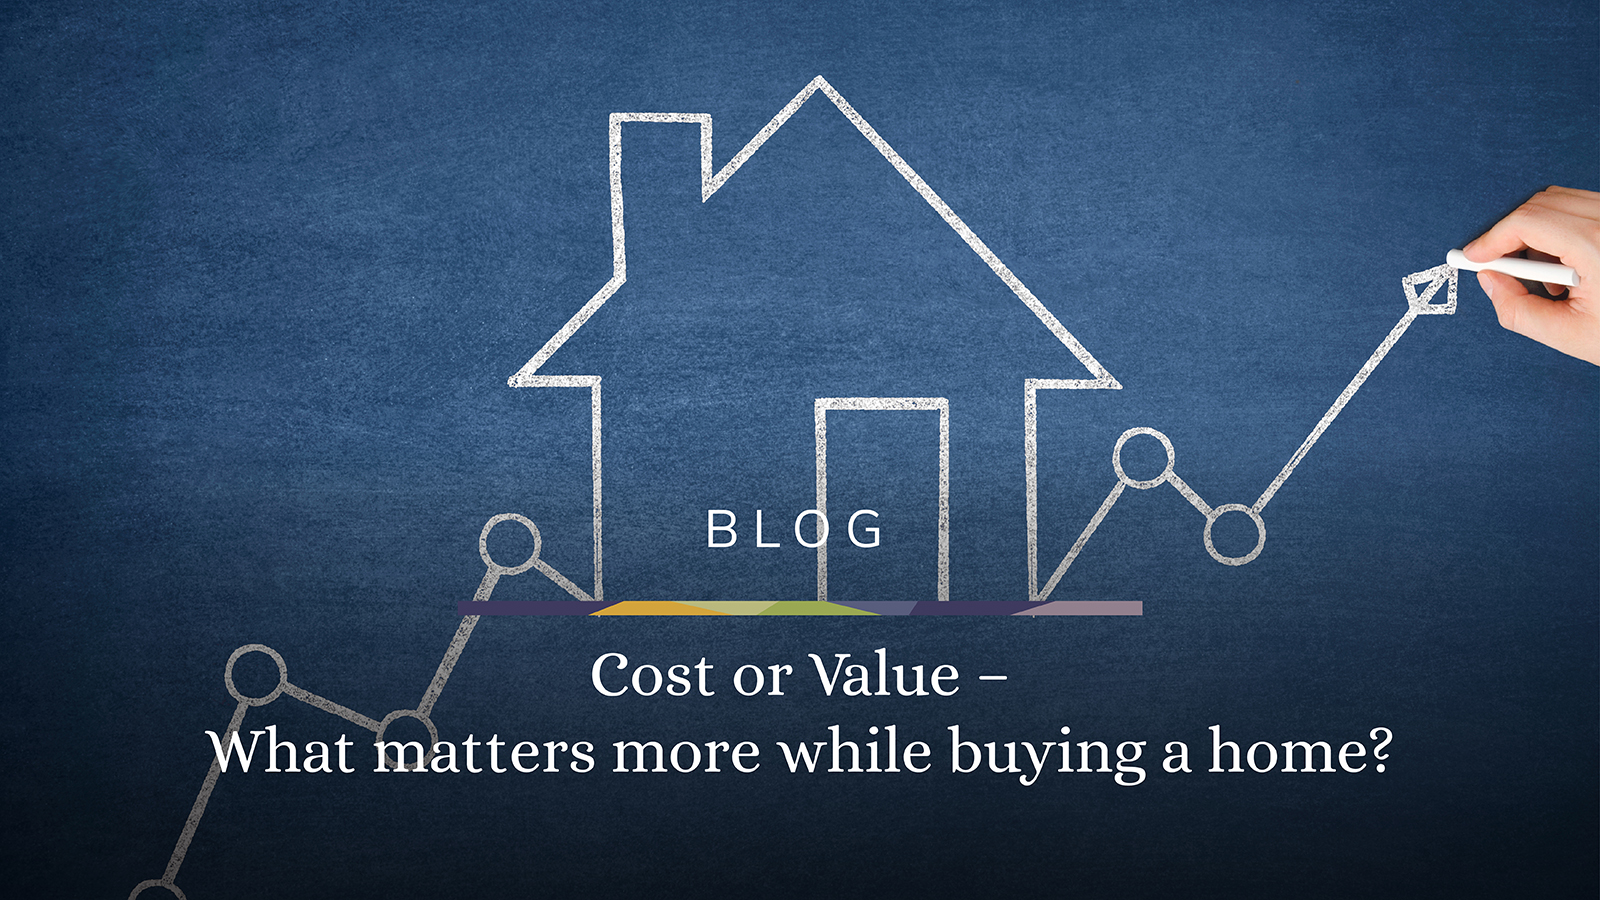 Blog Cost or Value 02